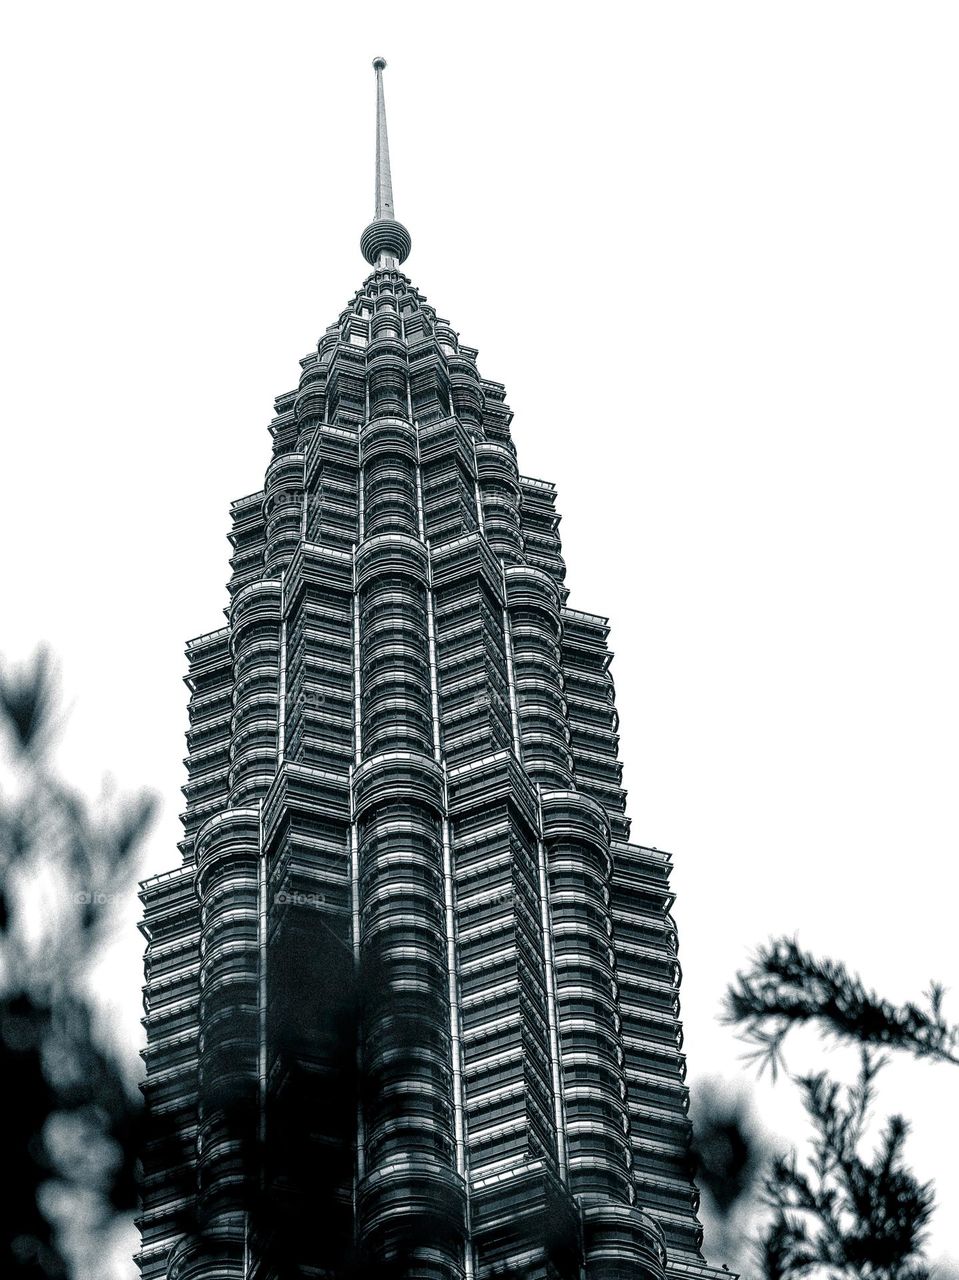 View of the Petronas Twin Towers from below, edited with dramatic black and white tone